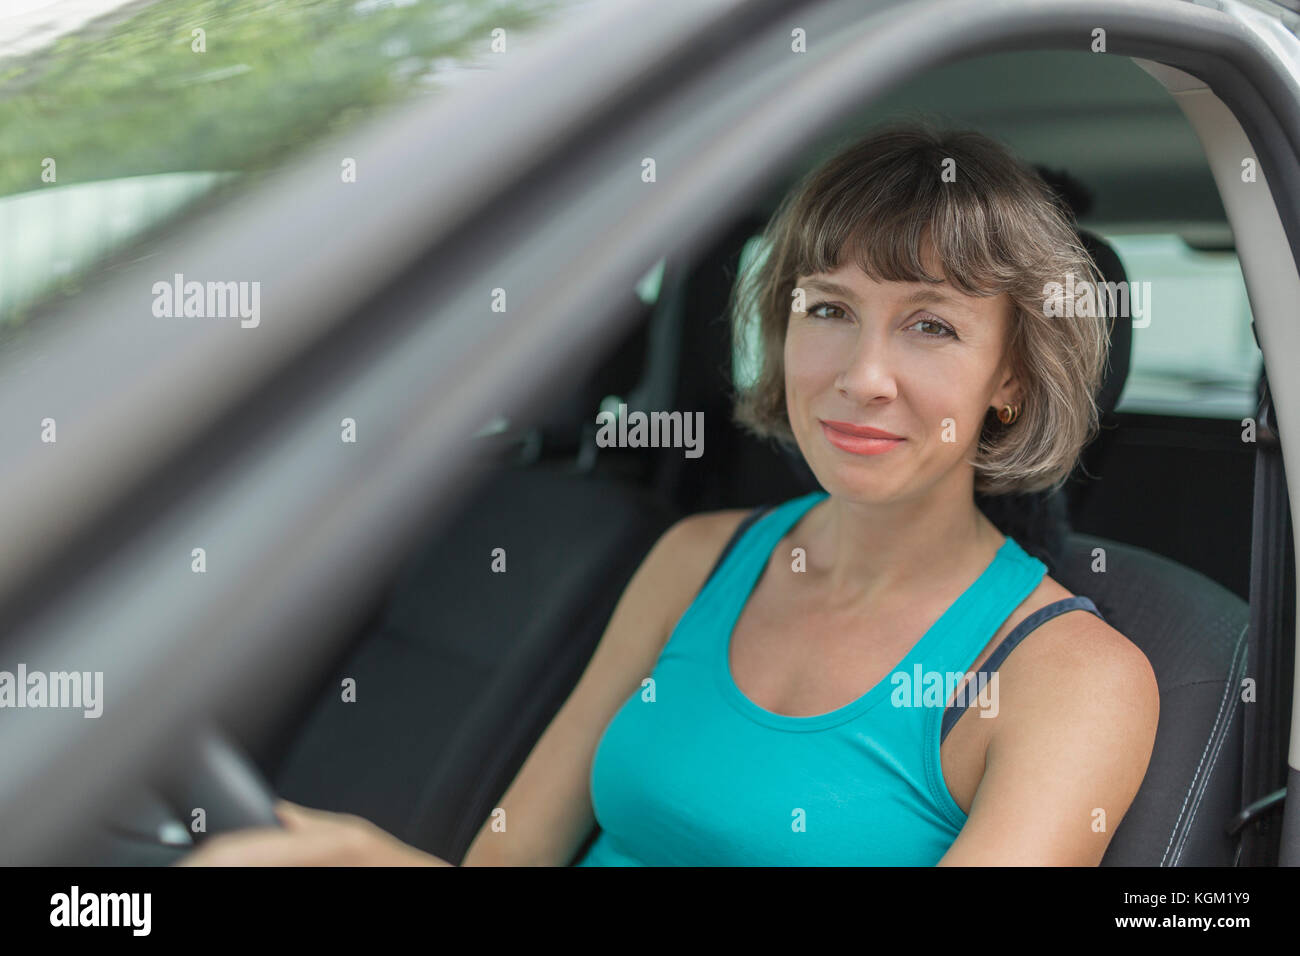 Portrait of smiling mature woman sitting in car Stock Photo